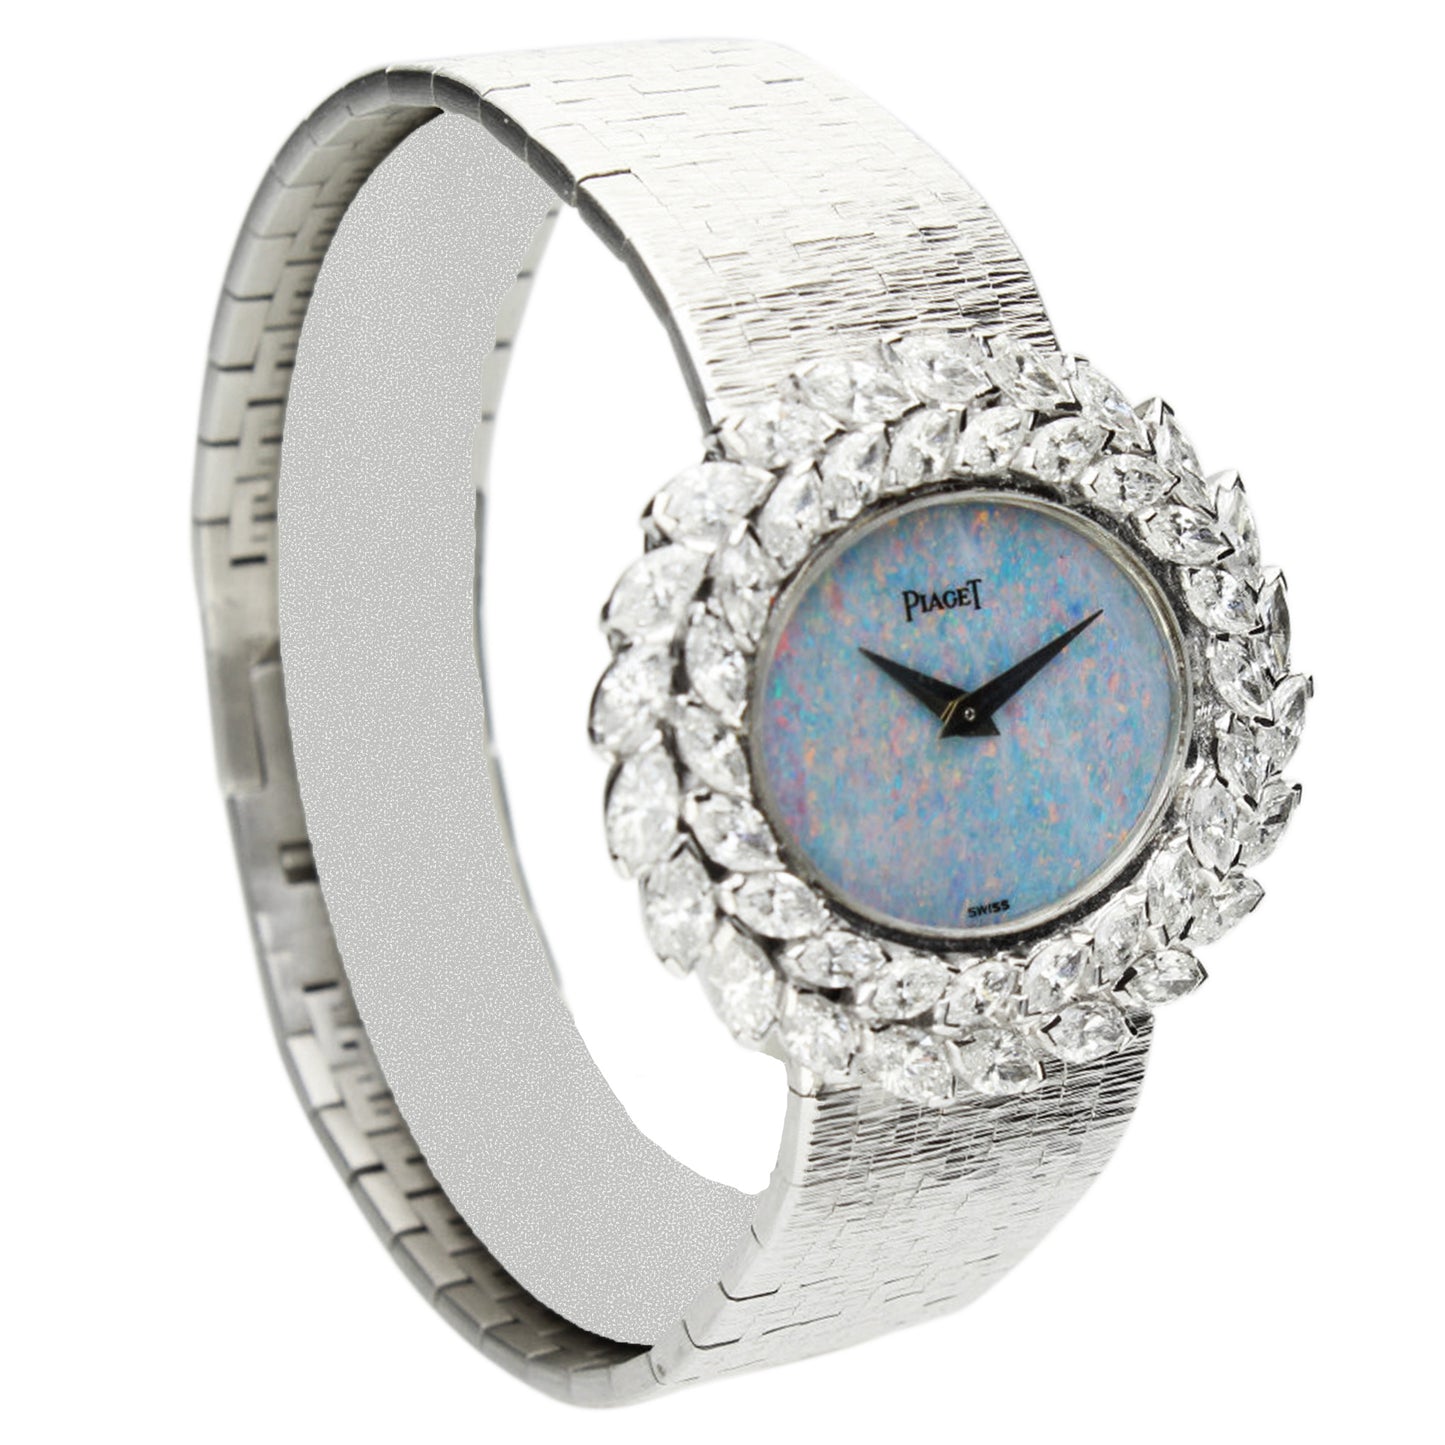 18ct white gold and diamond set, reference 9385 bracelet watch with opal dial. Made 1972